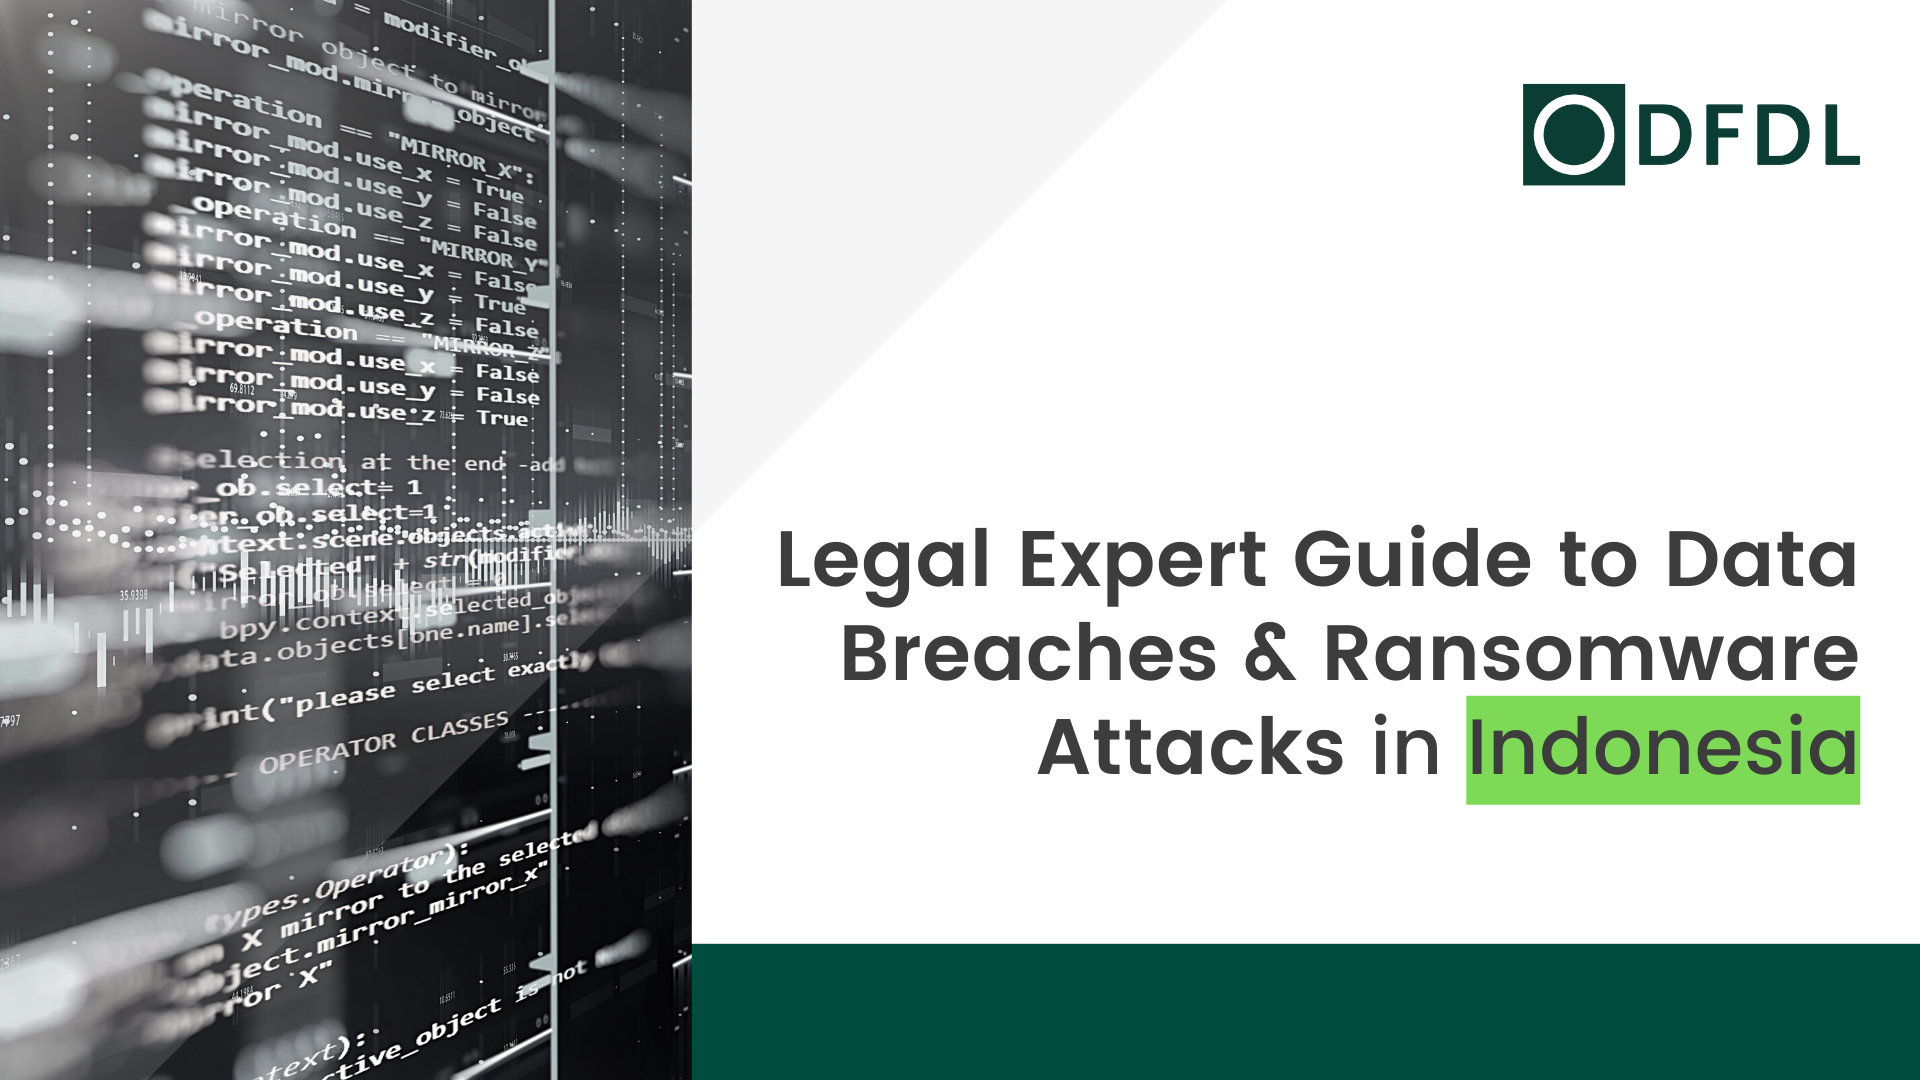 Indonesia – Legal Expert Guide to Data Breaches & Ransomware Attacks